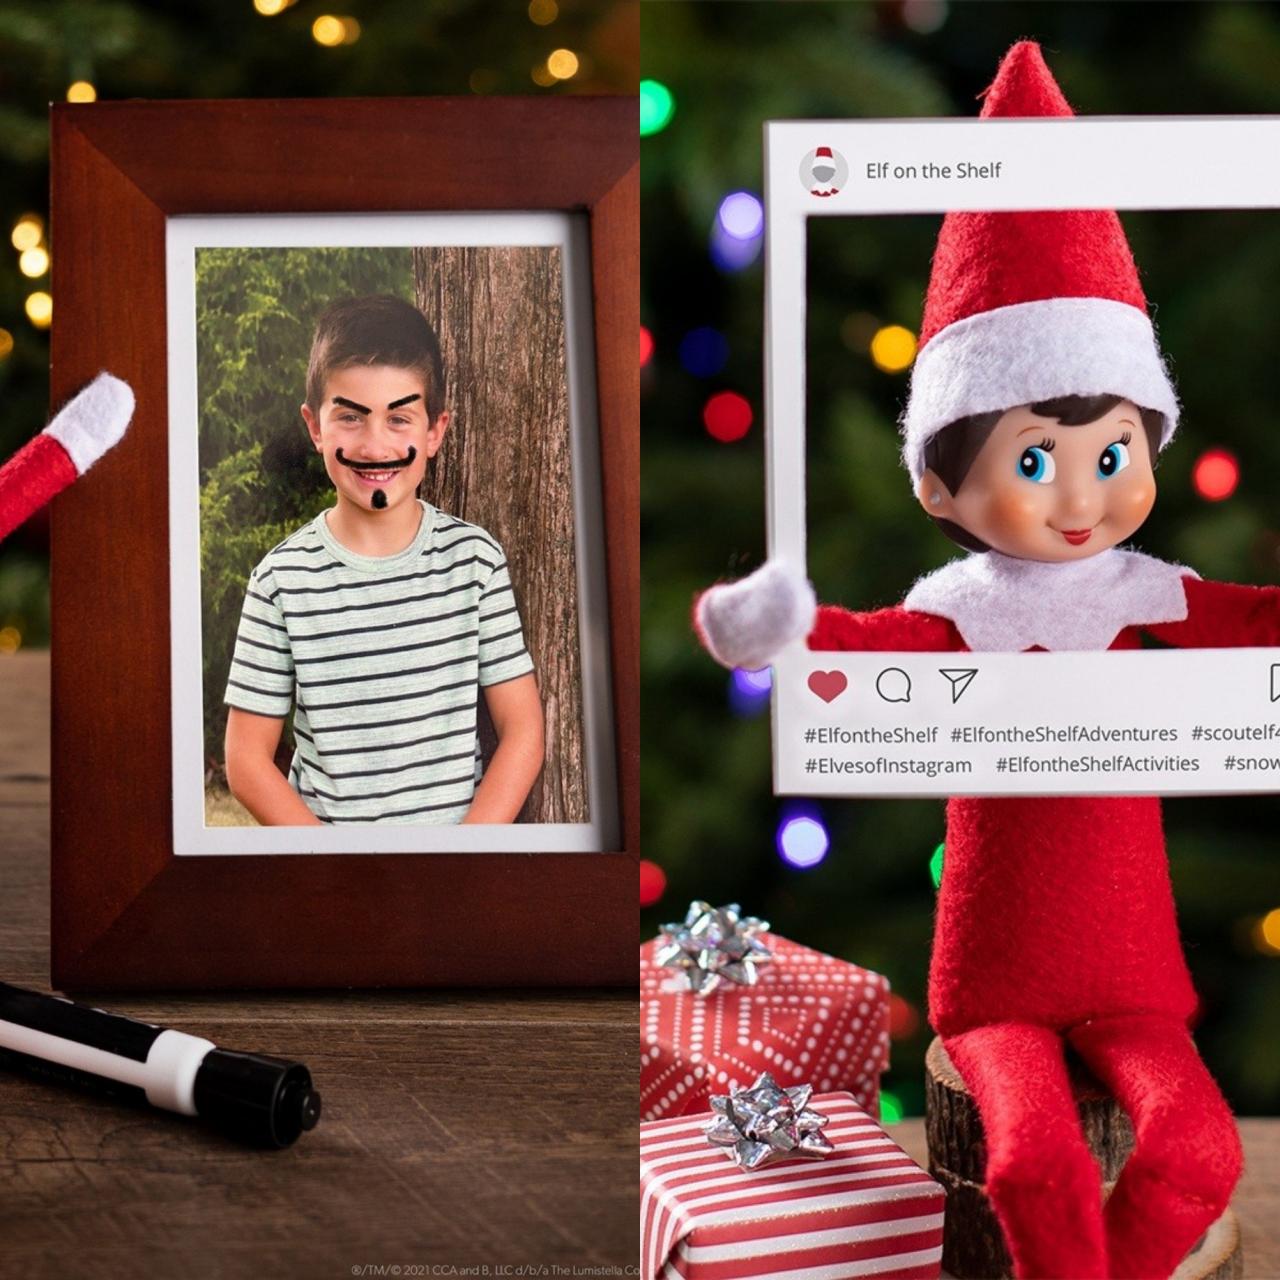 Little ELF - Make your life easier this holiday season by tossing